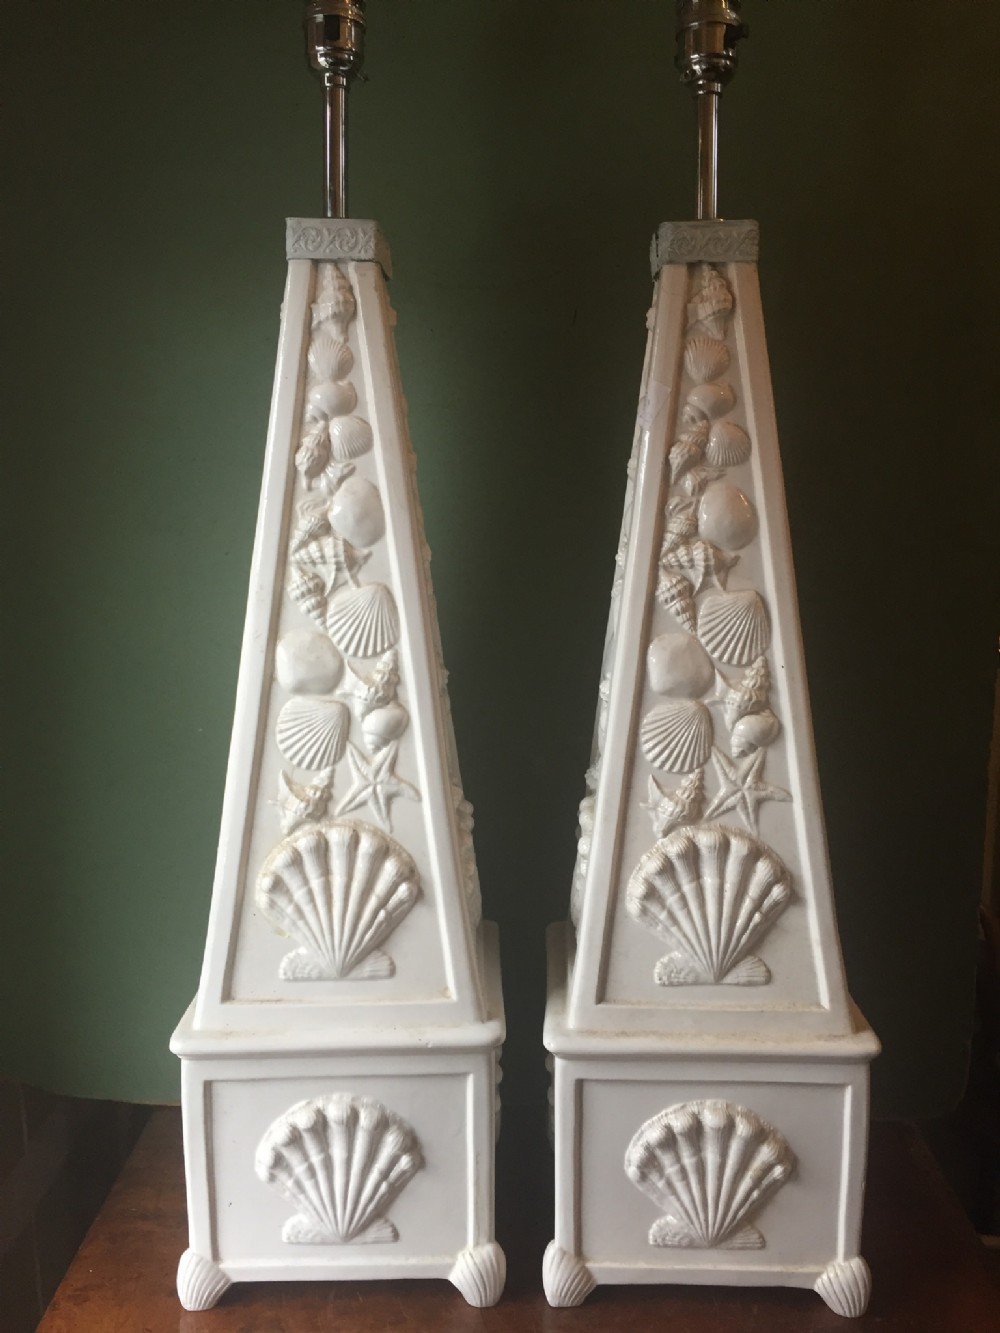 highly decorative pair of early c20th italian pottery lamps of obelisk form with raised 'seashell' decoration